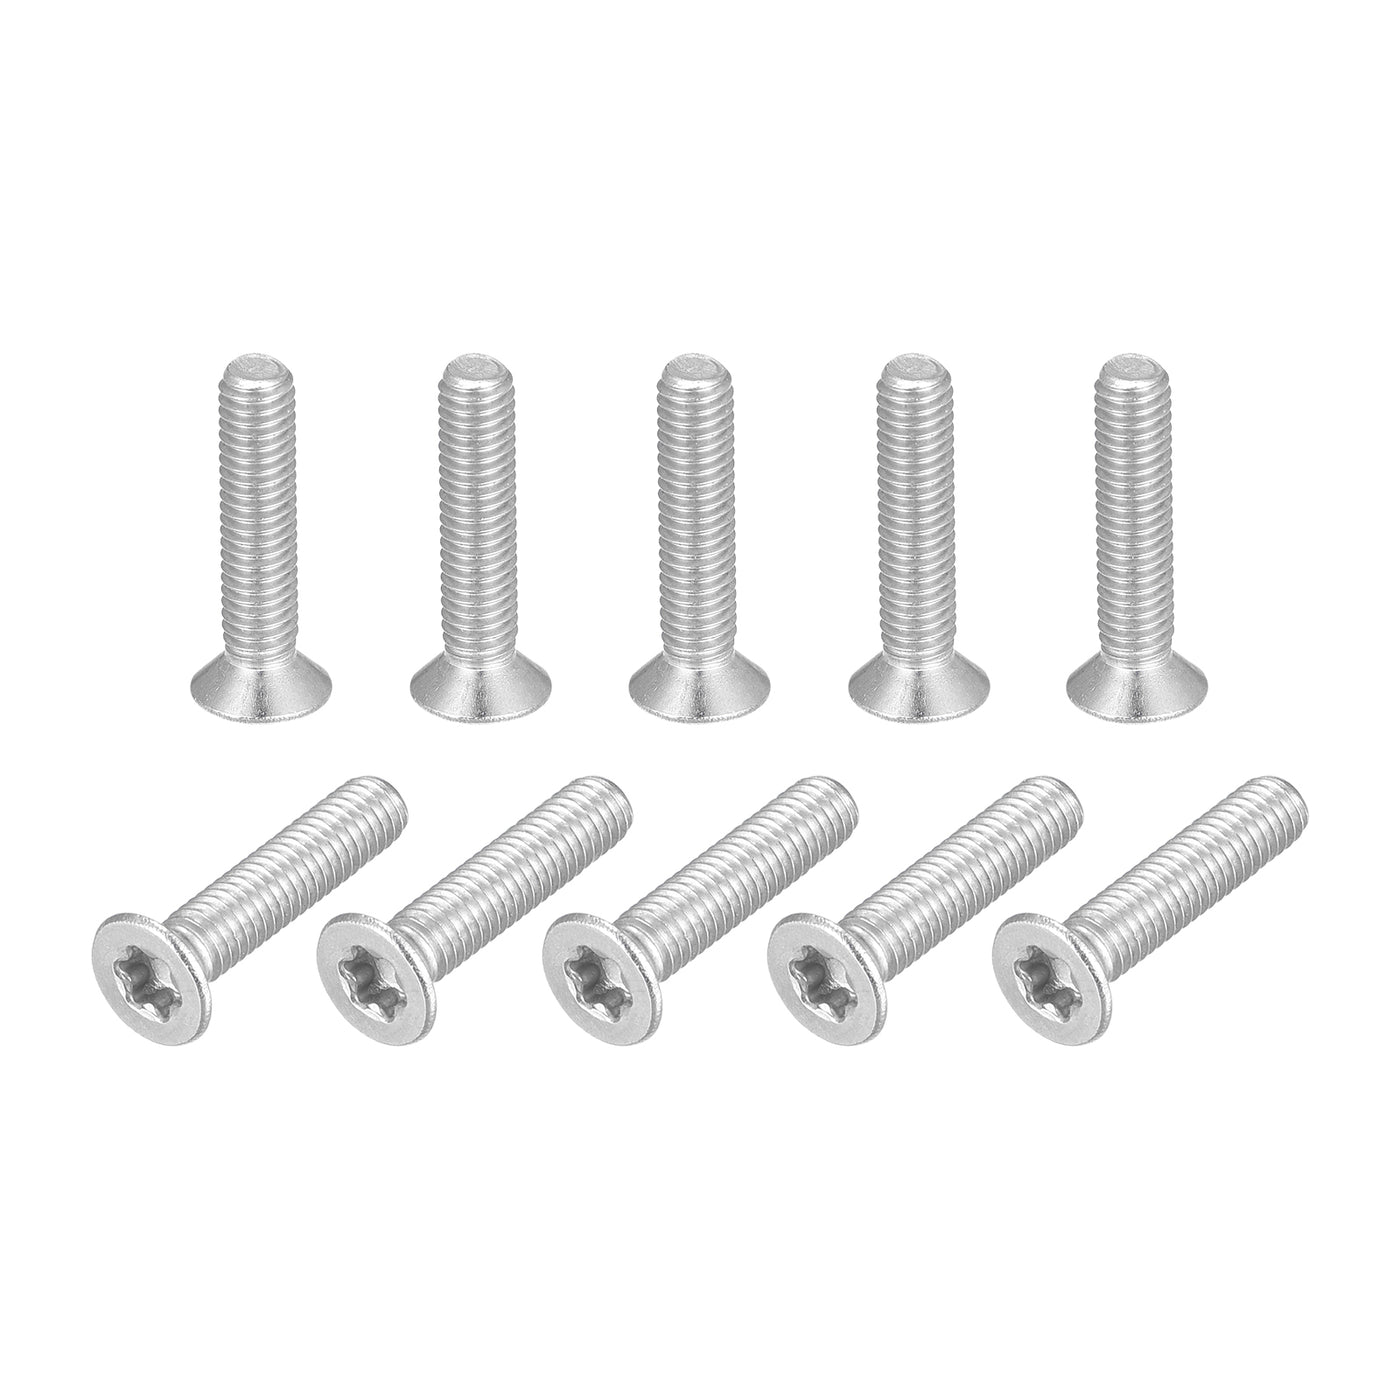 uxcell Uxcell M3x14mm Torx Security Screws, 10pcs 316 Stainless Steel Countersunk Head Screw